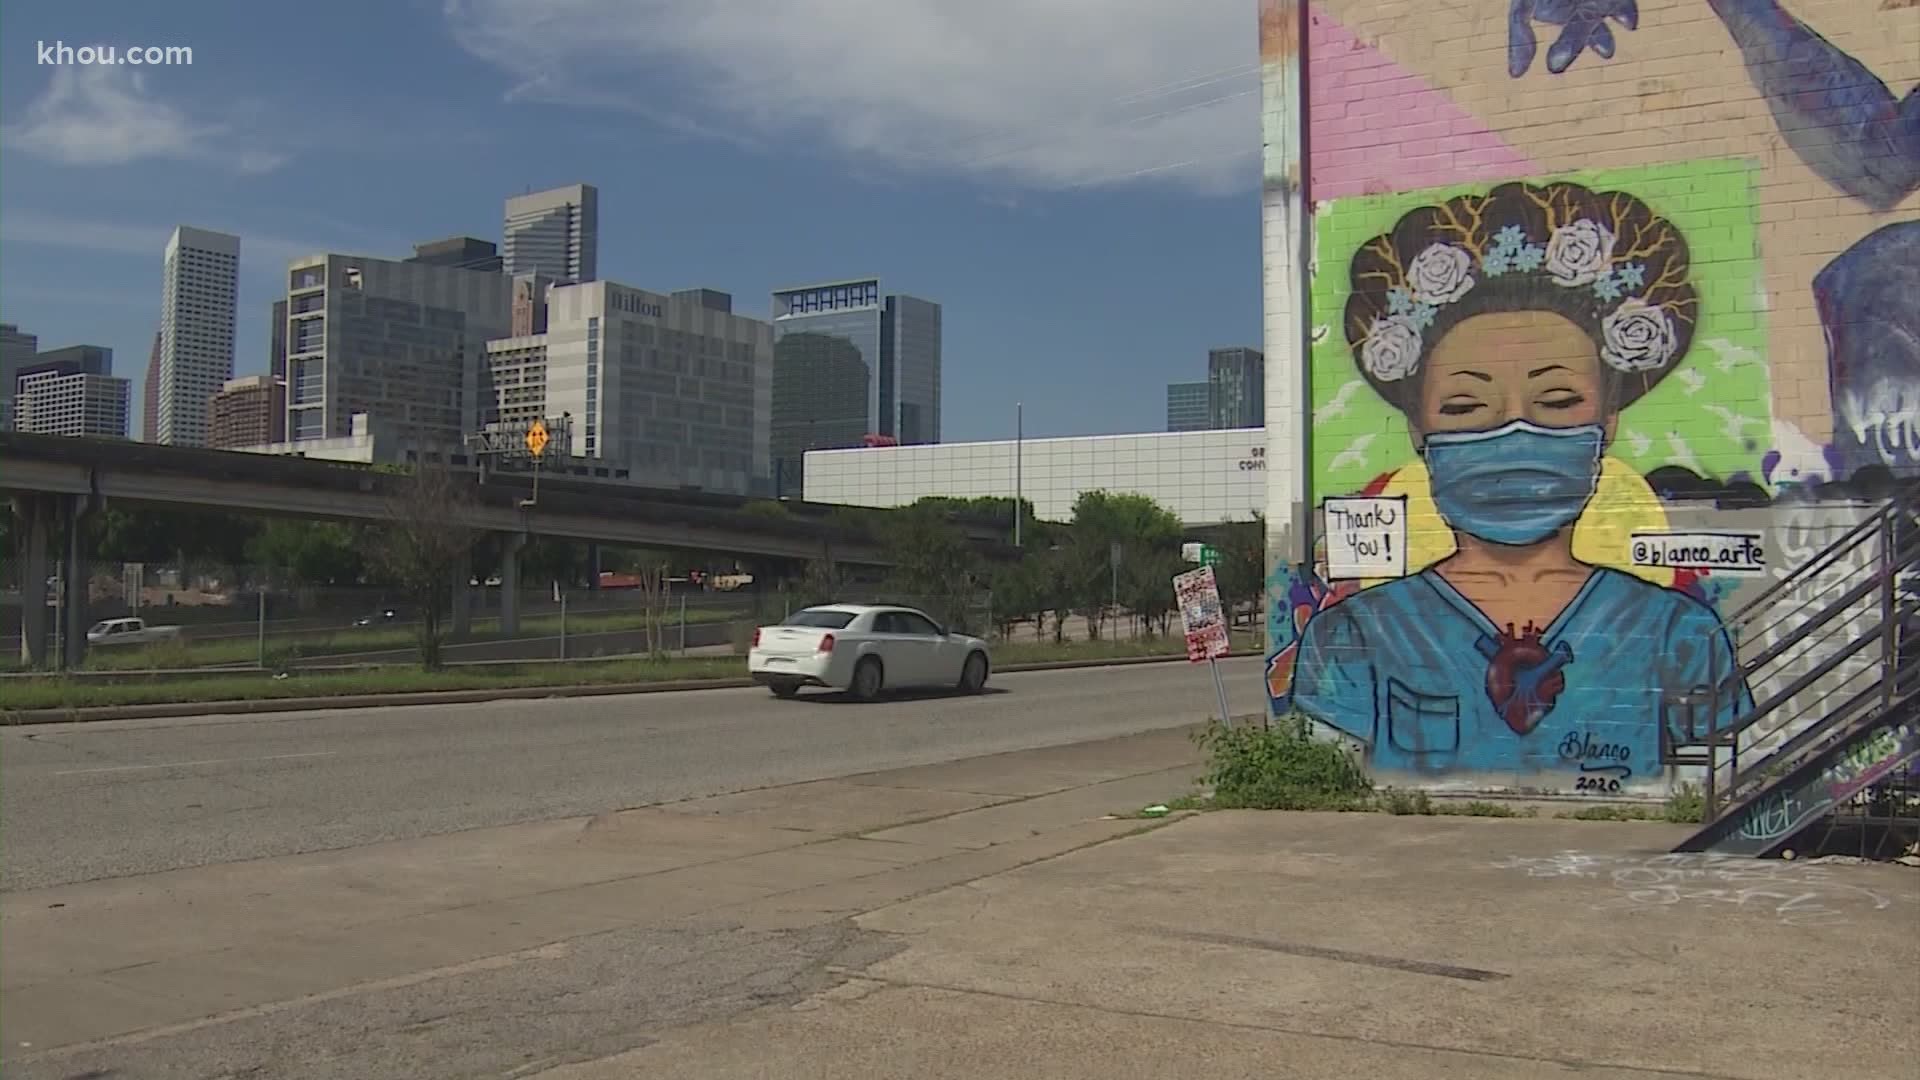 Close to 1,000 murals have been mapped out so far on HoustonMuralMap.com.